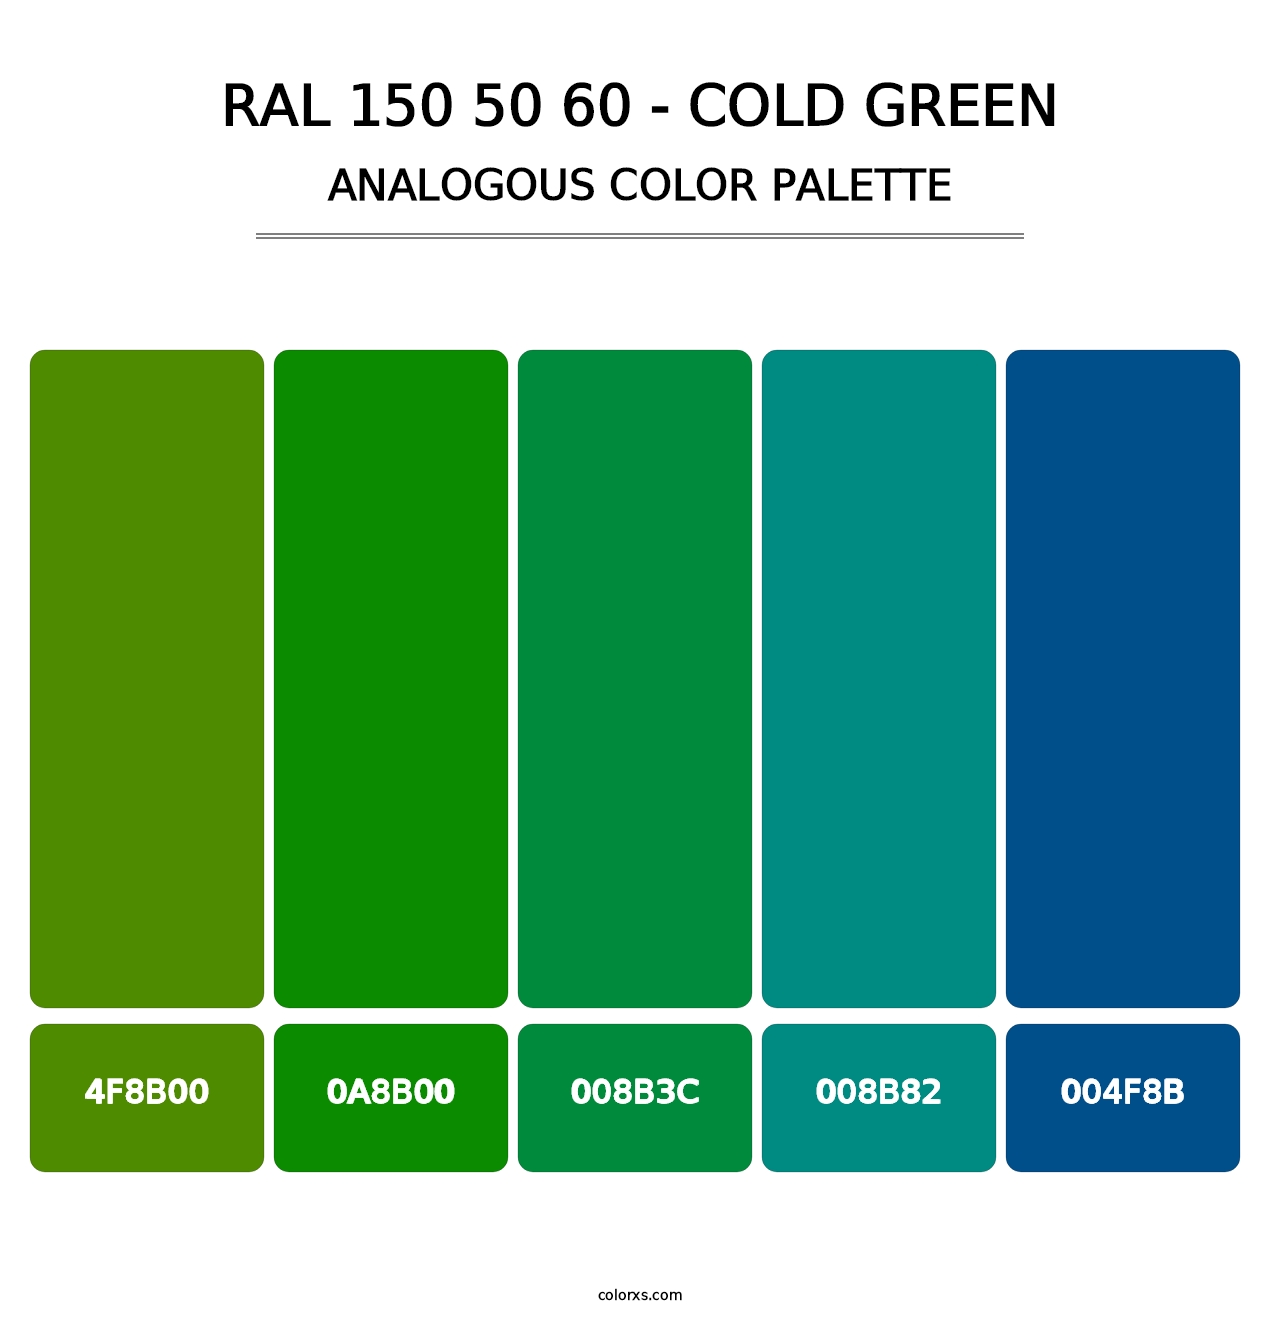 RAL 150 50 60 - Cold Green - Analogous Color Palette